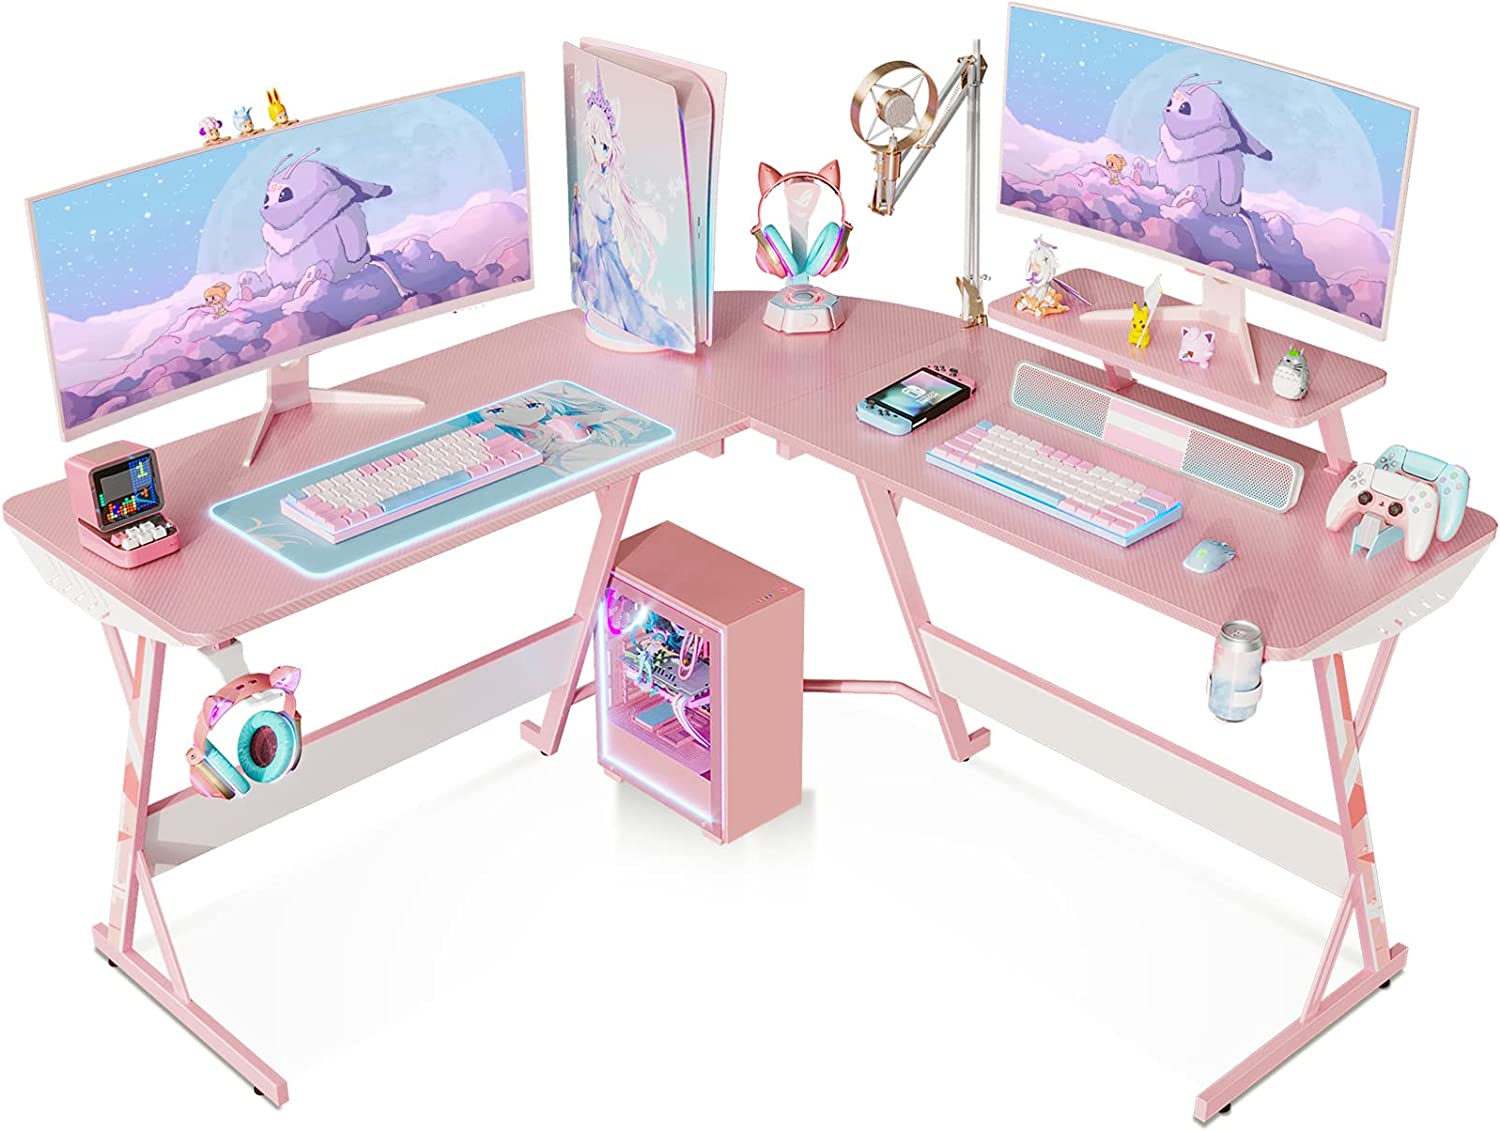 51 Inch Large Gaming Desk L-Shaped With Monitor Shelf - Pink